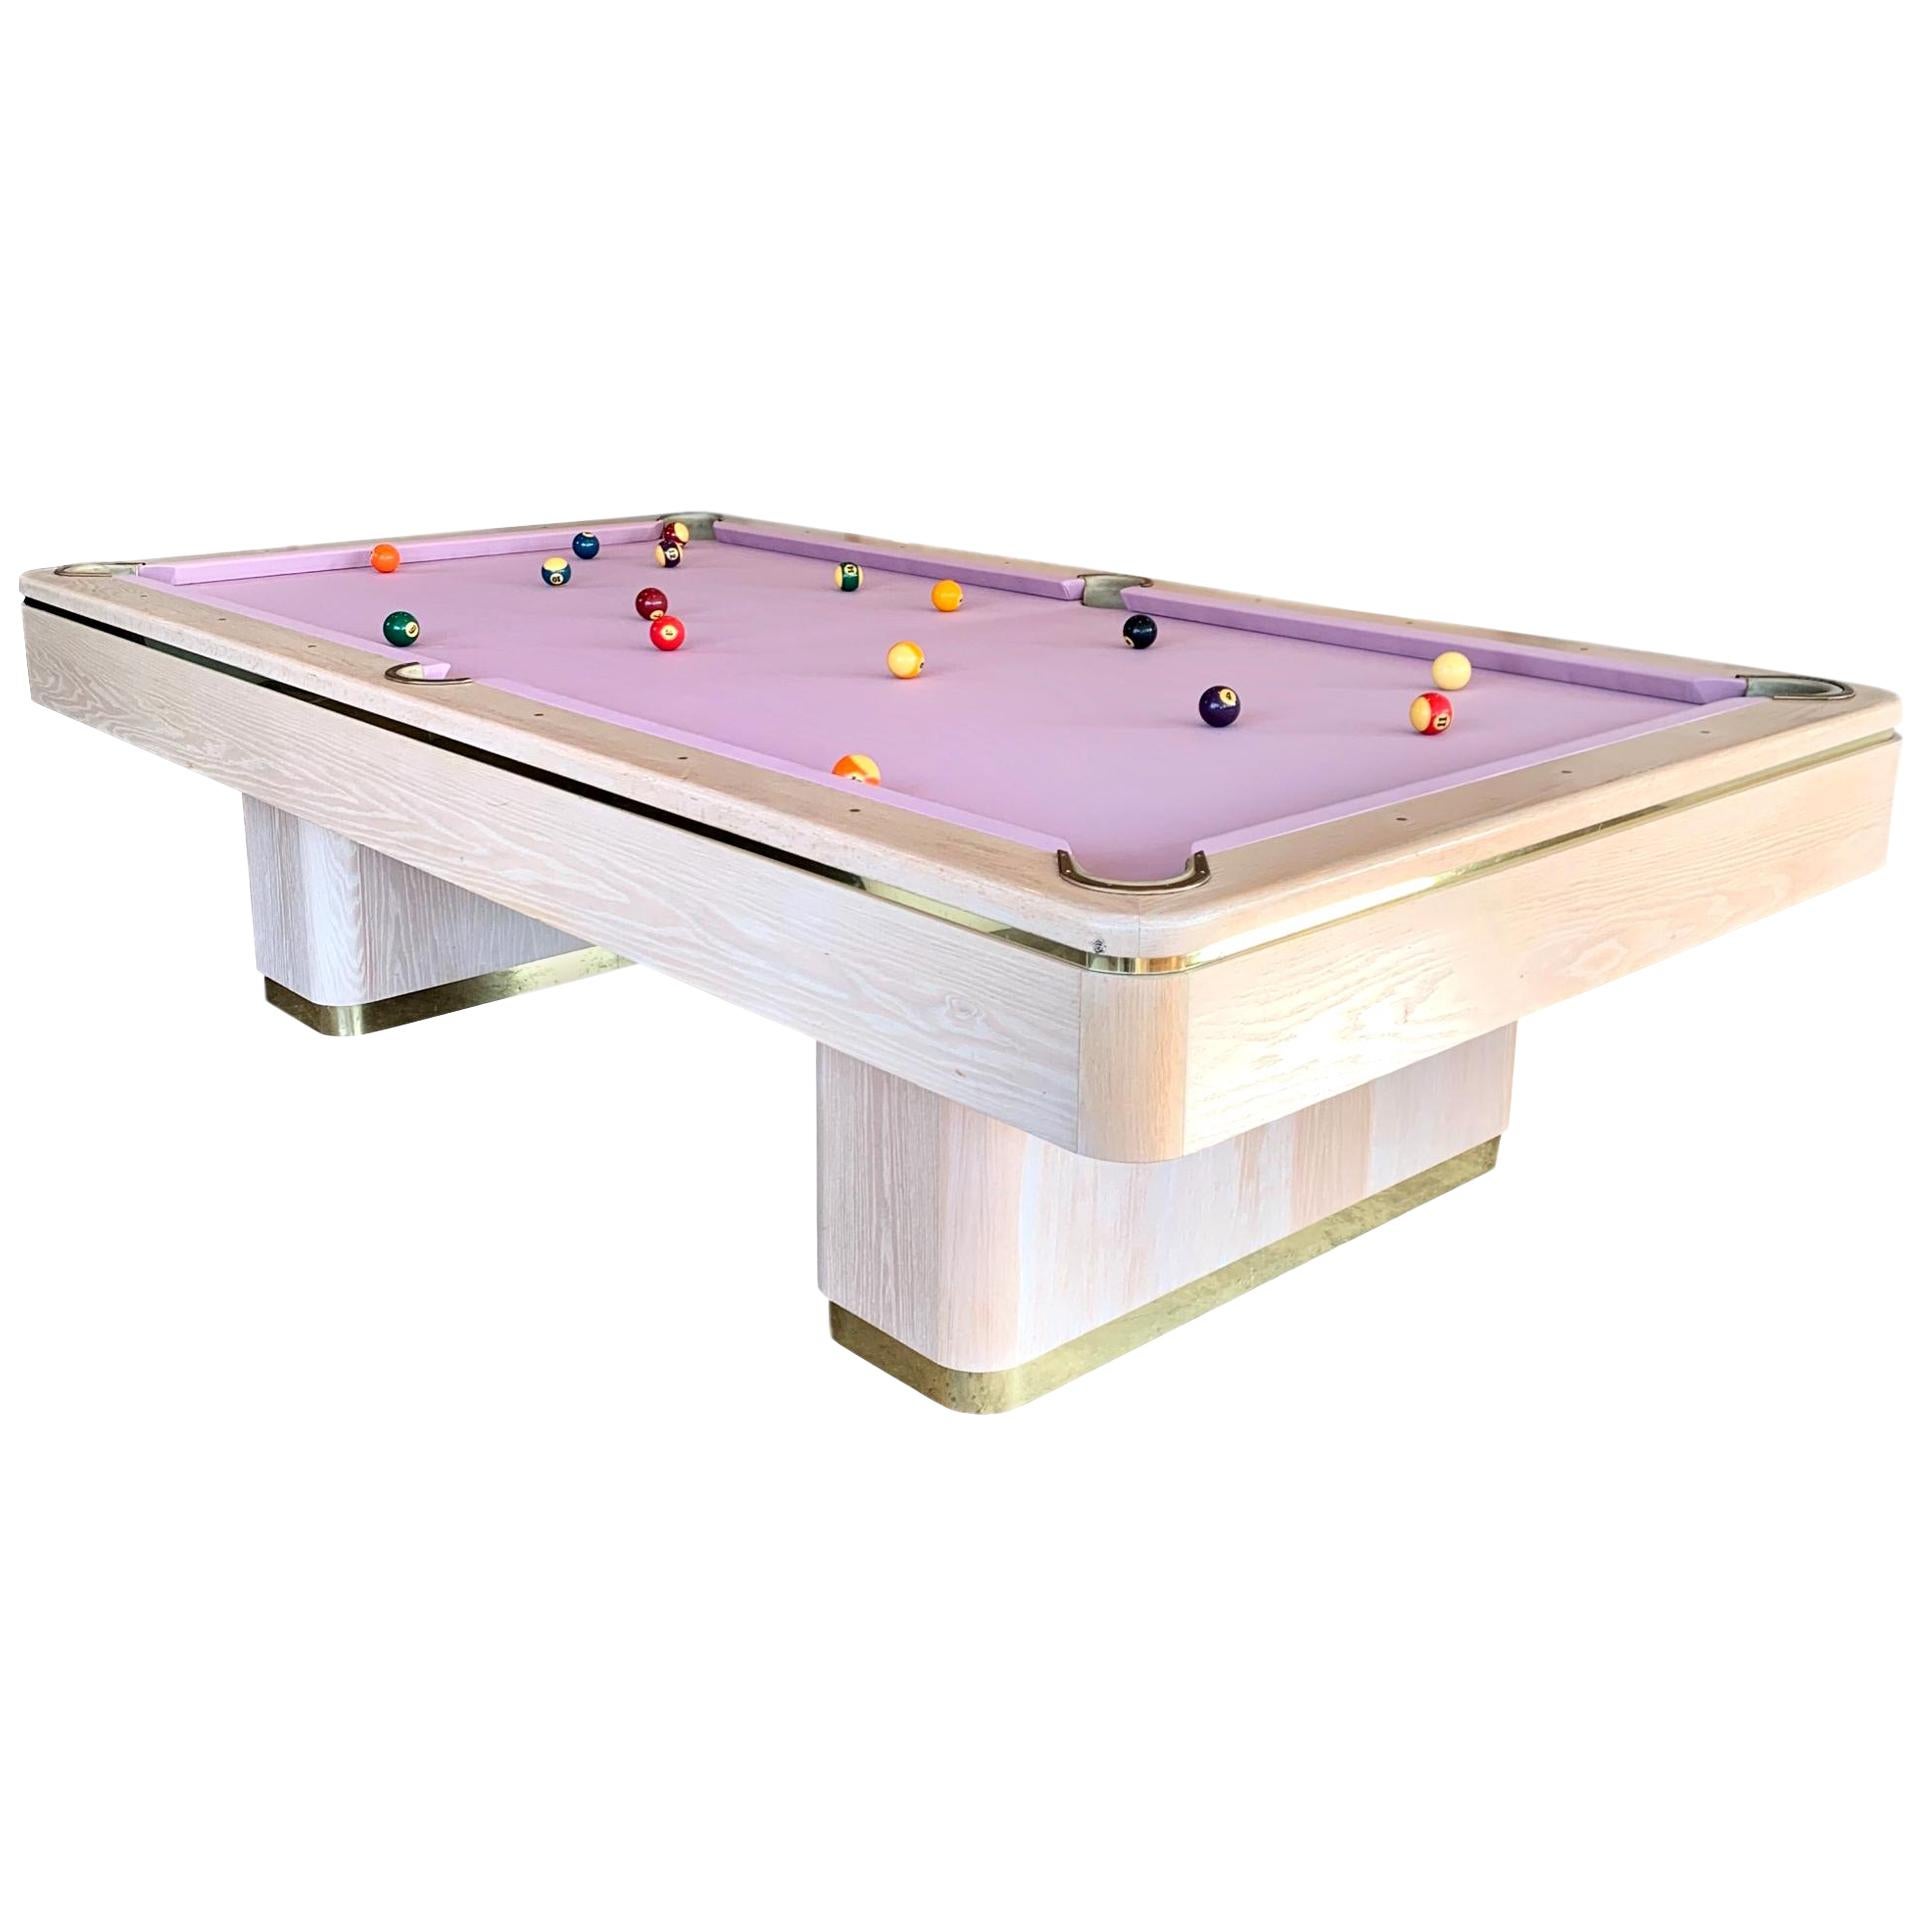 1990 Olhausen Oak And Brass Pool Table At 1stdibs Pink Pool Table Pool Table Pink Louis